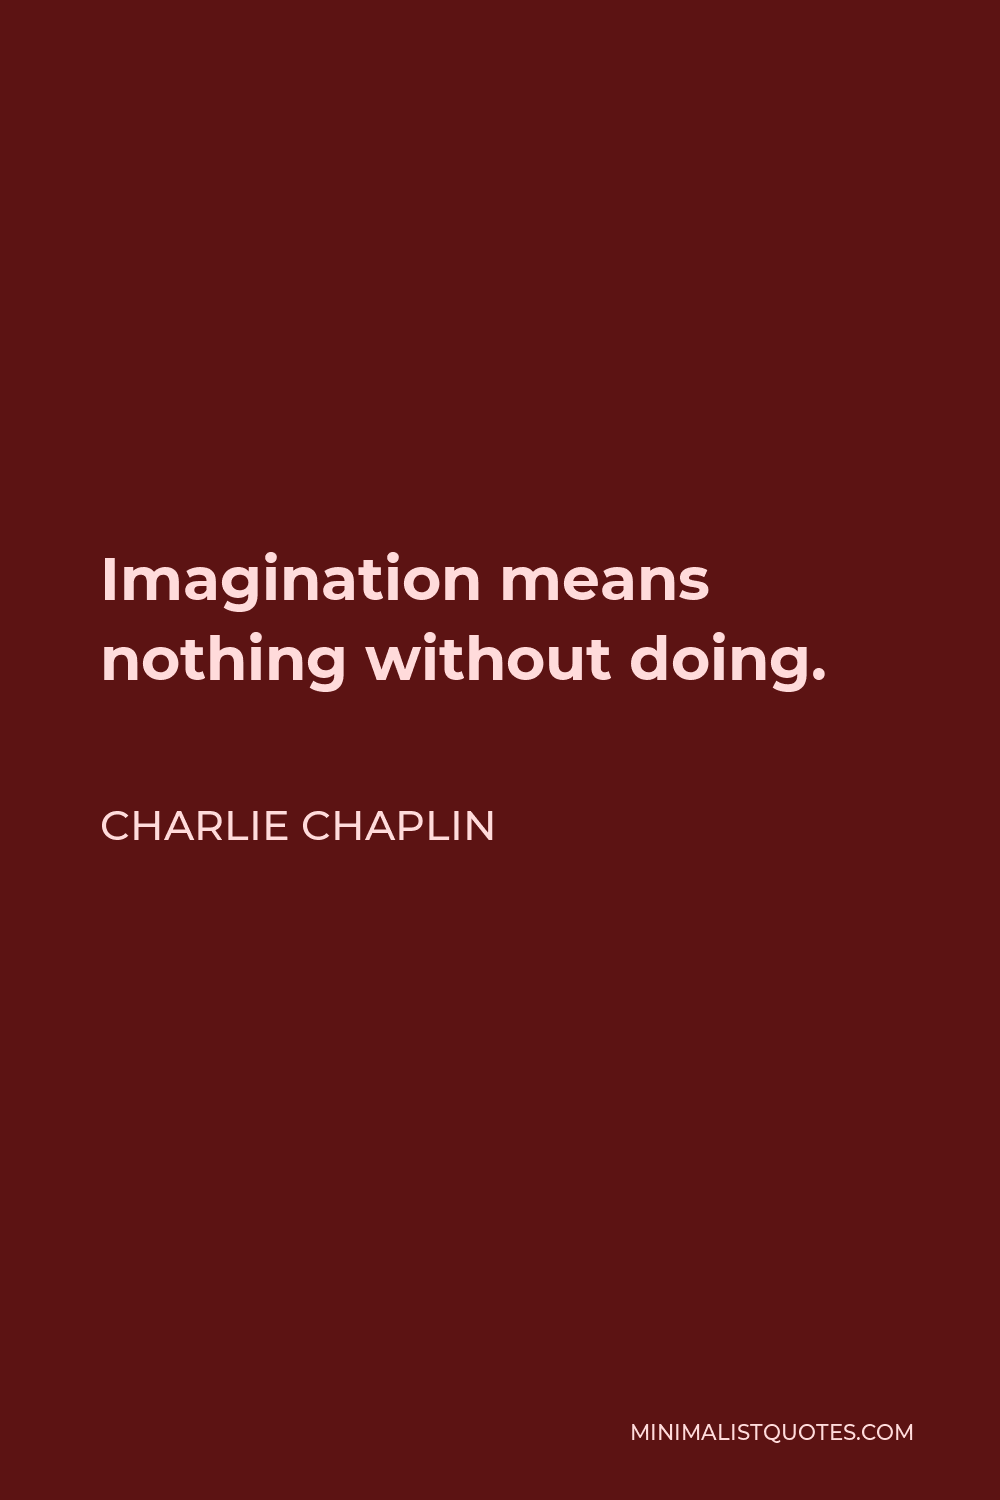 Charlie Chaplin Quote - Imagination means nothing without doing.